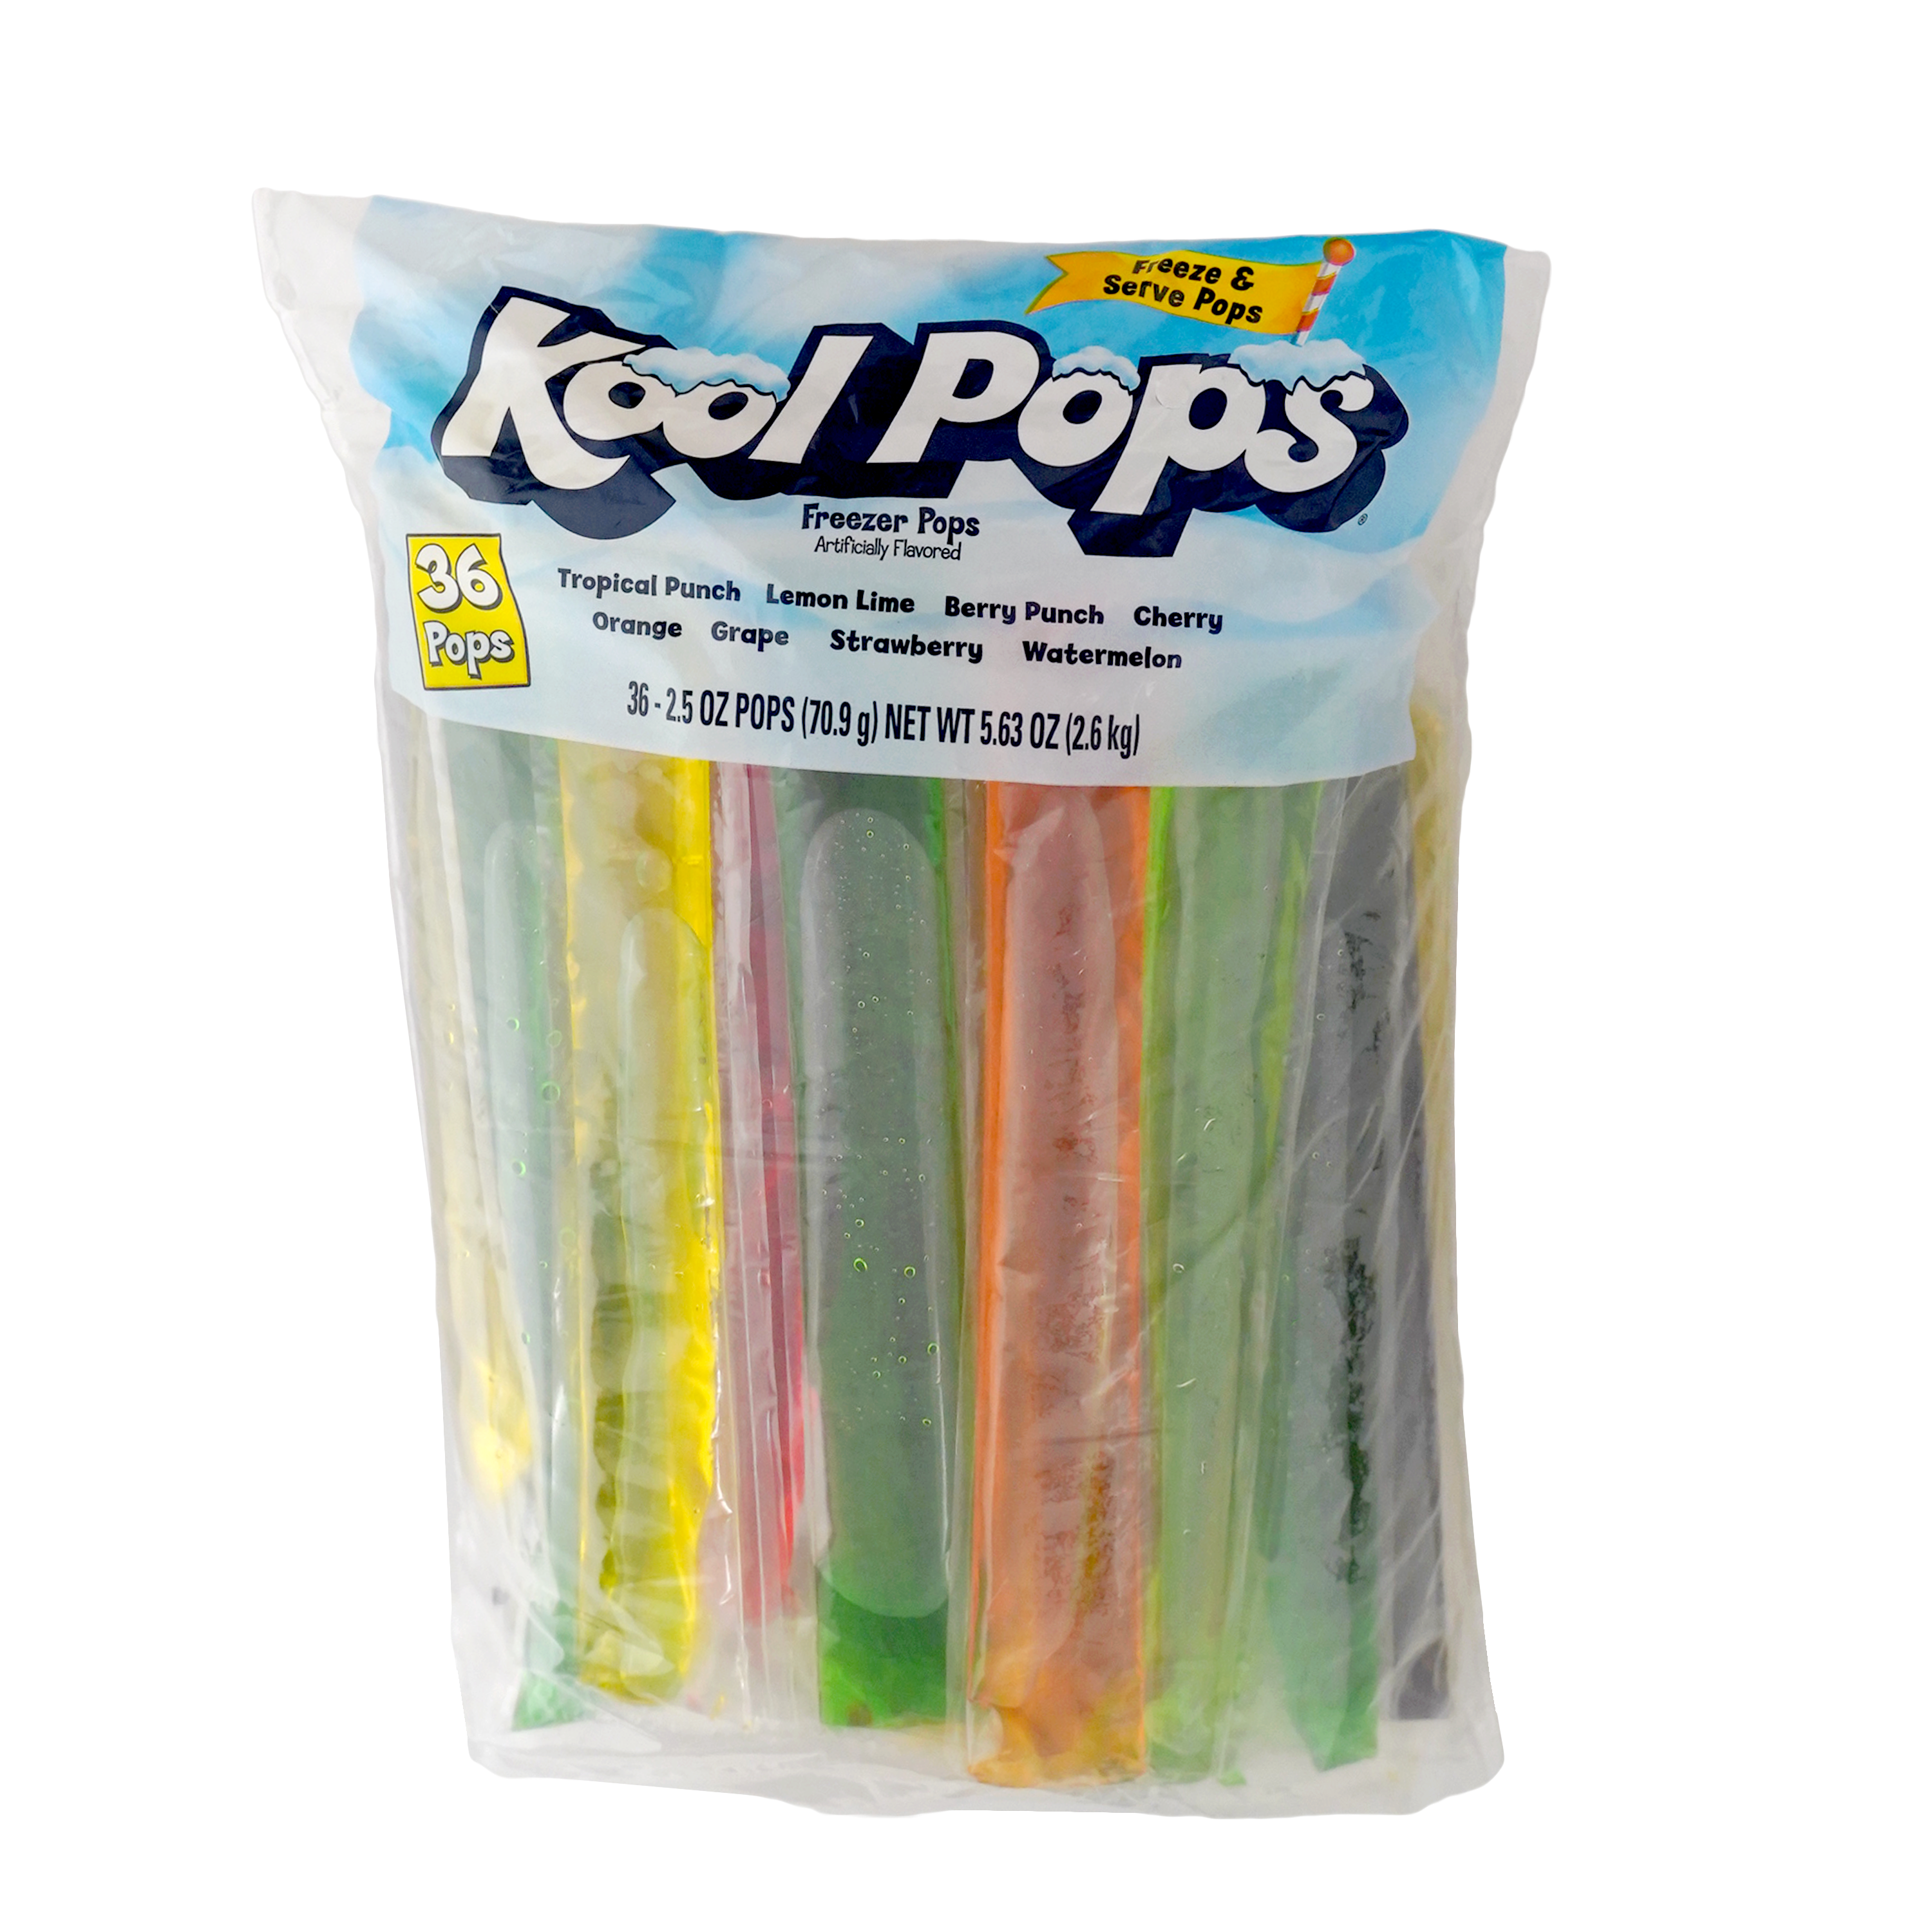 Buy Ice Pop Insulator Sleeves Freezer Pop Holders Bags 30 Pieces Style A  Online at Low Prices in India  Amazonin